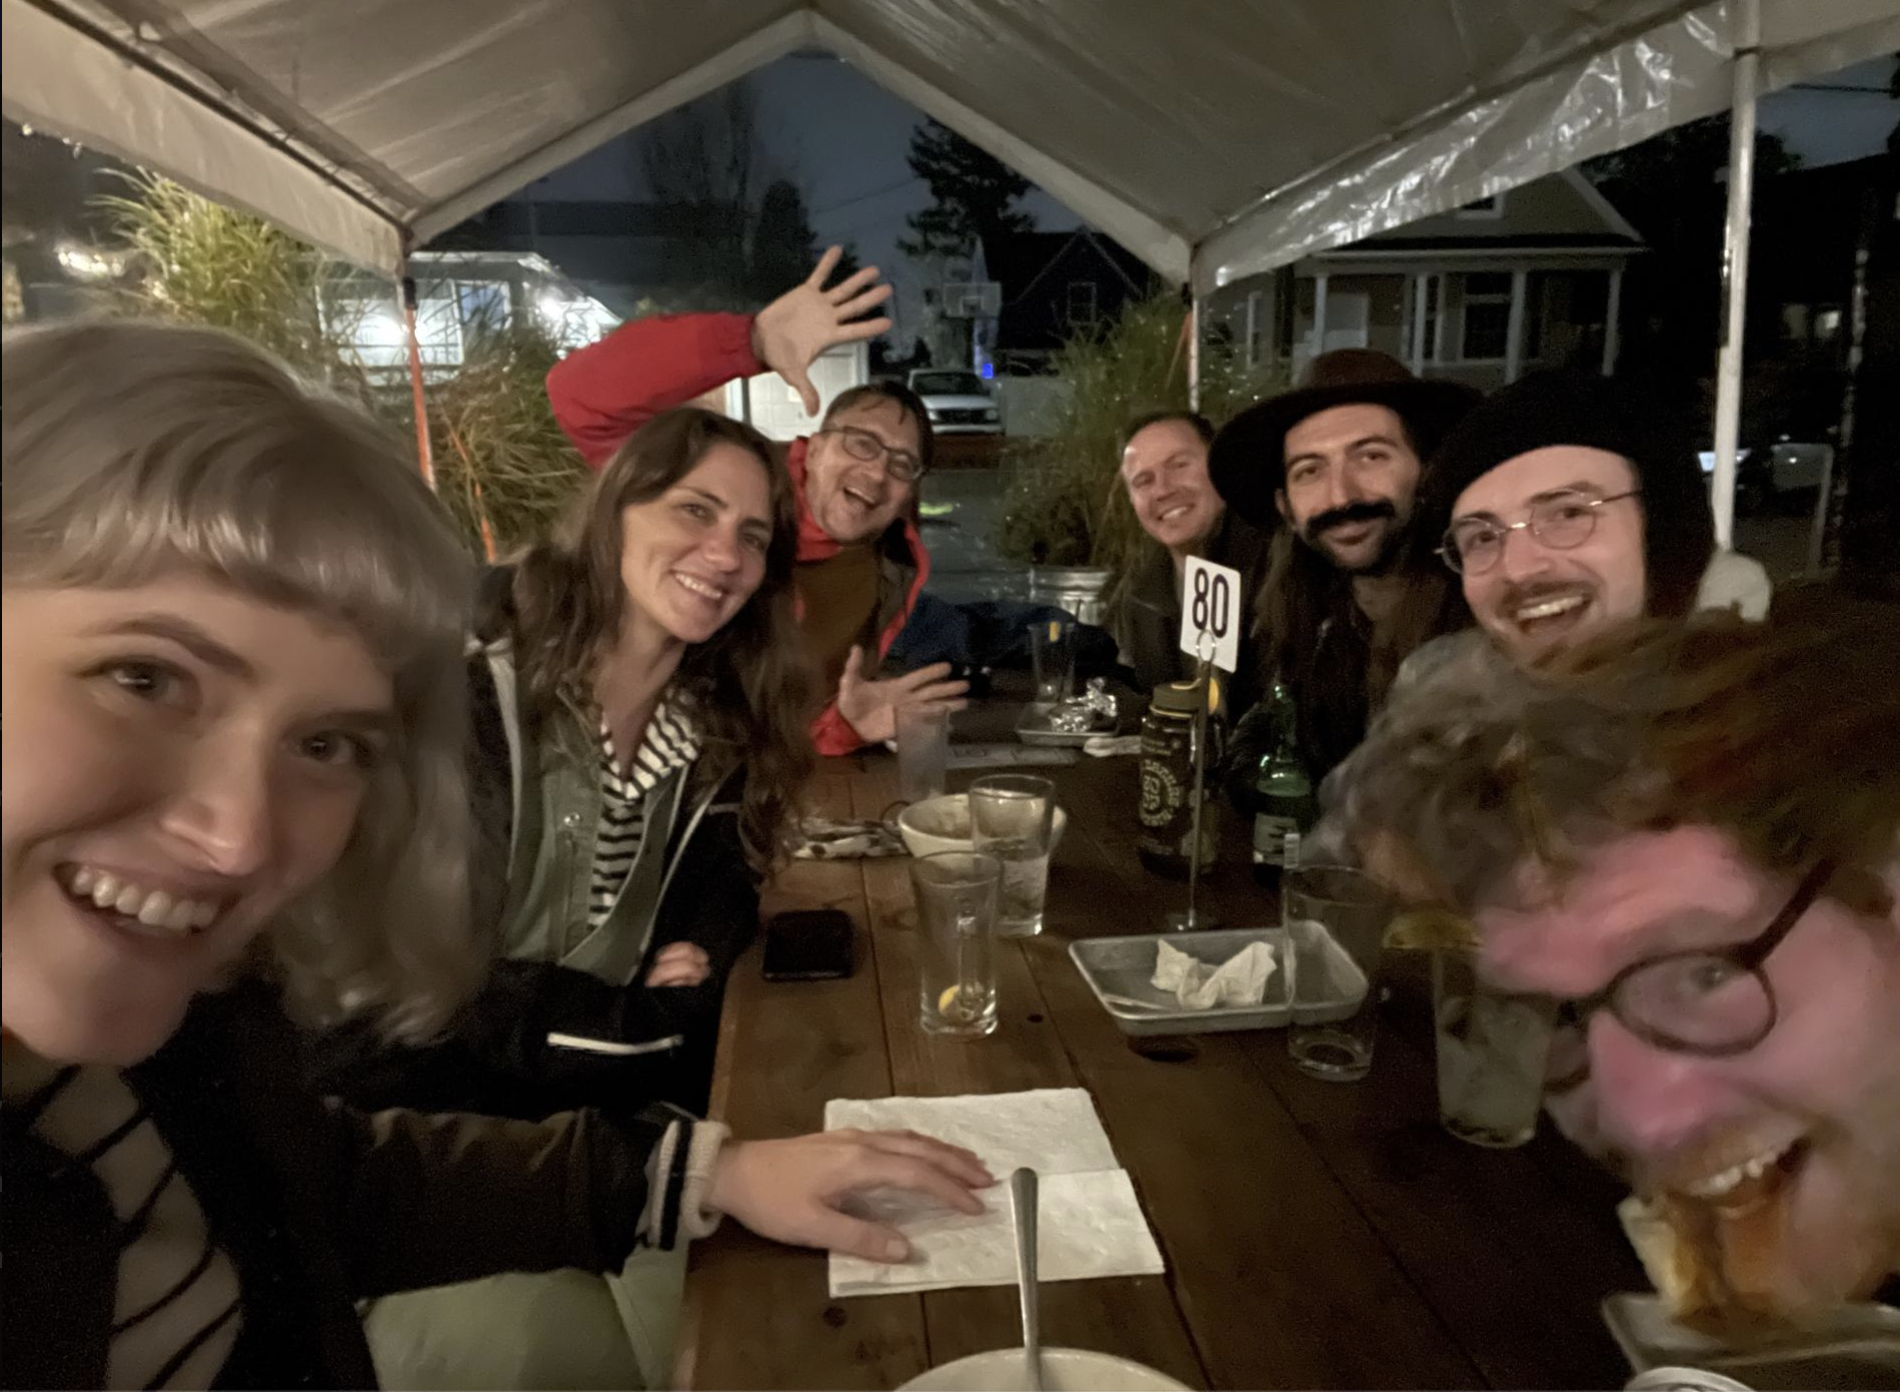 The Portland chapter's first meal together